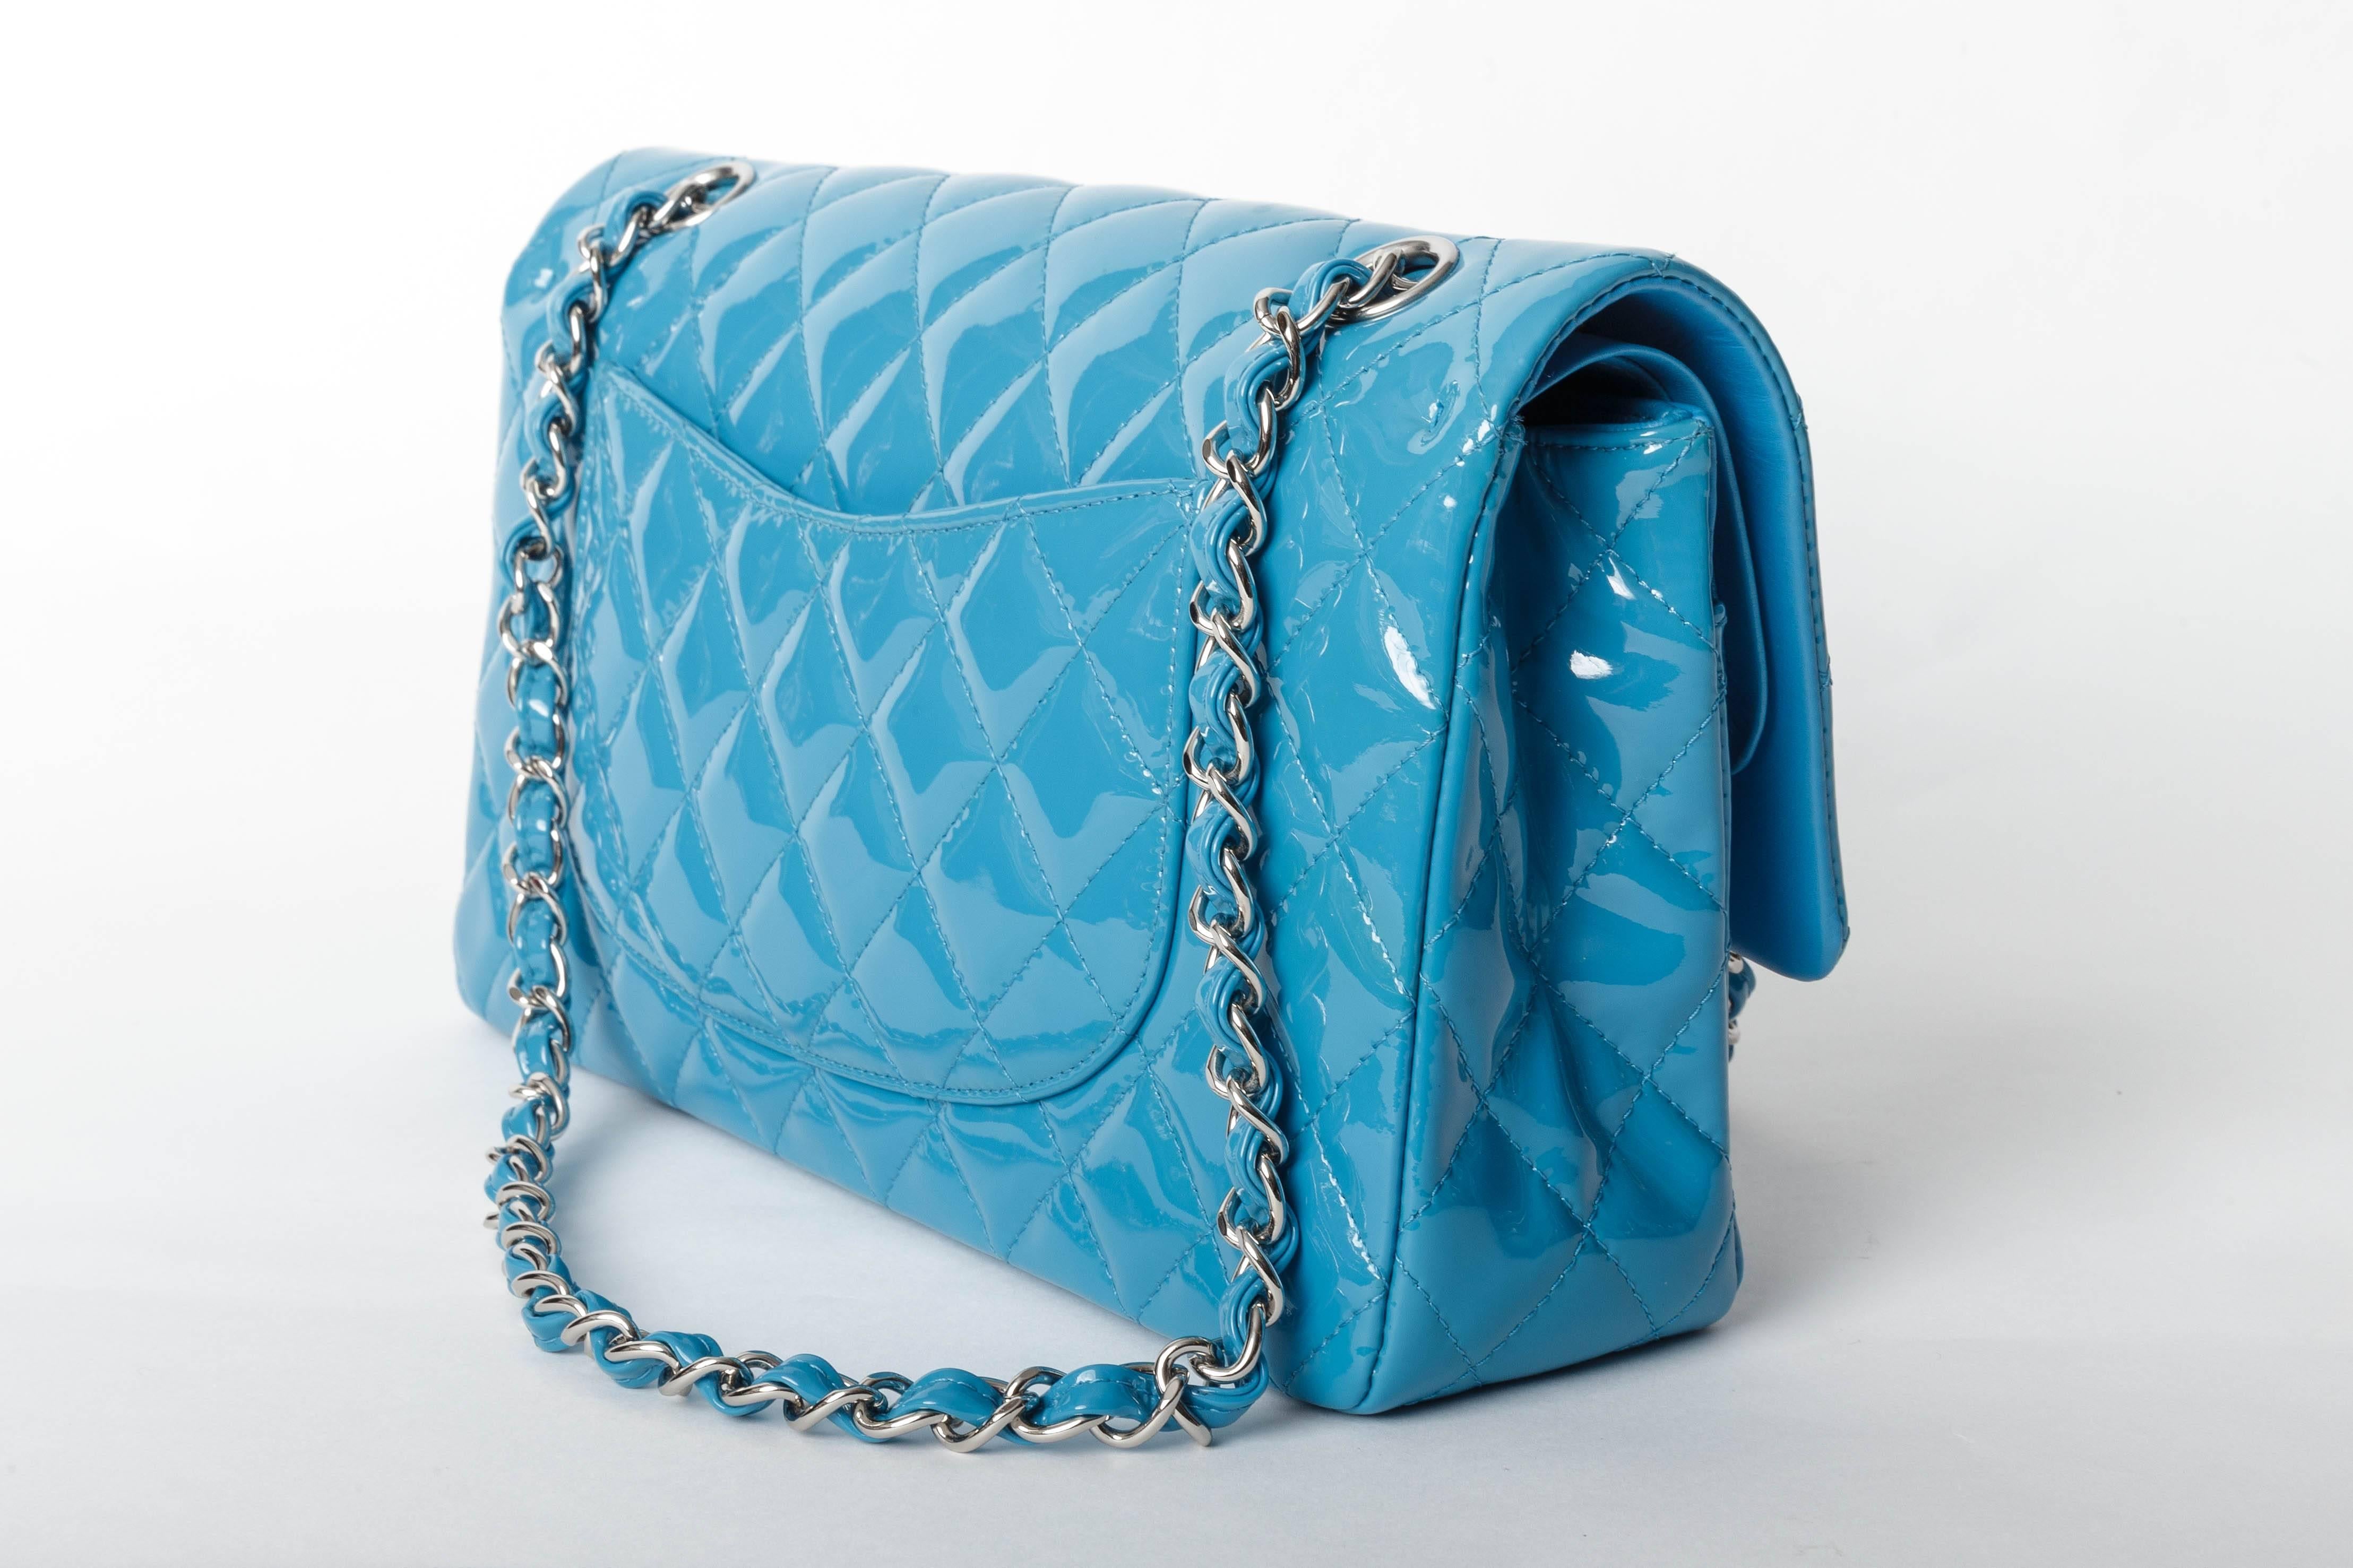 Women's Chanel Teal Patent Medium Classic Double Flap Bag with Silver Hardware